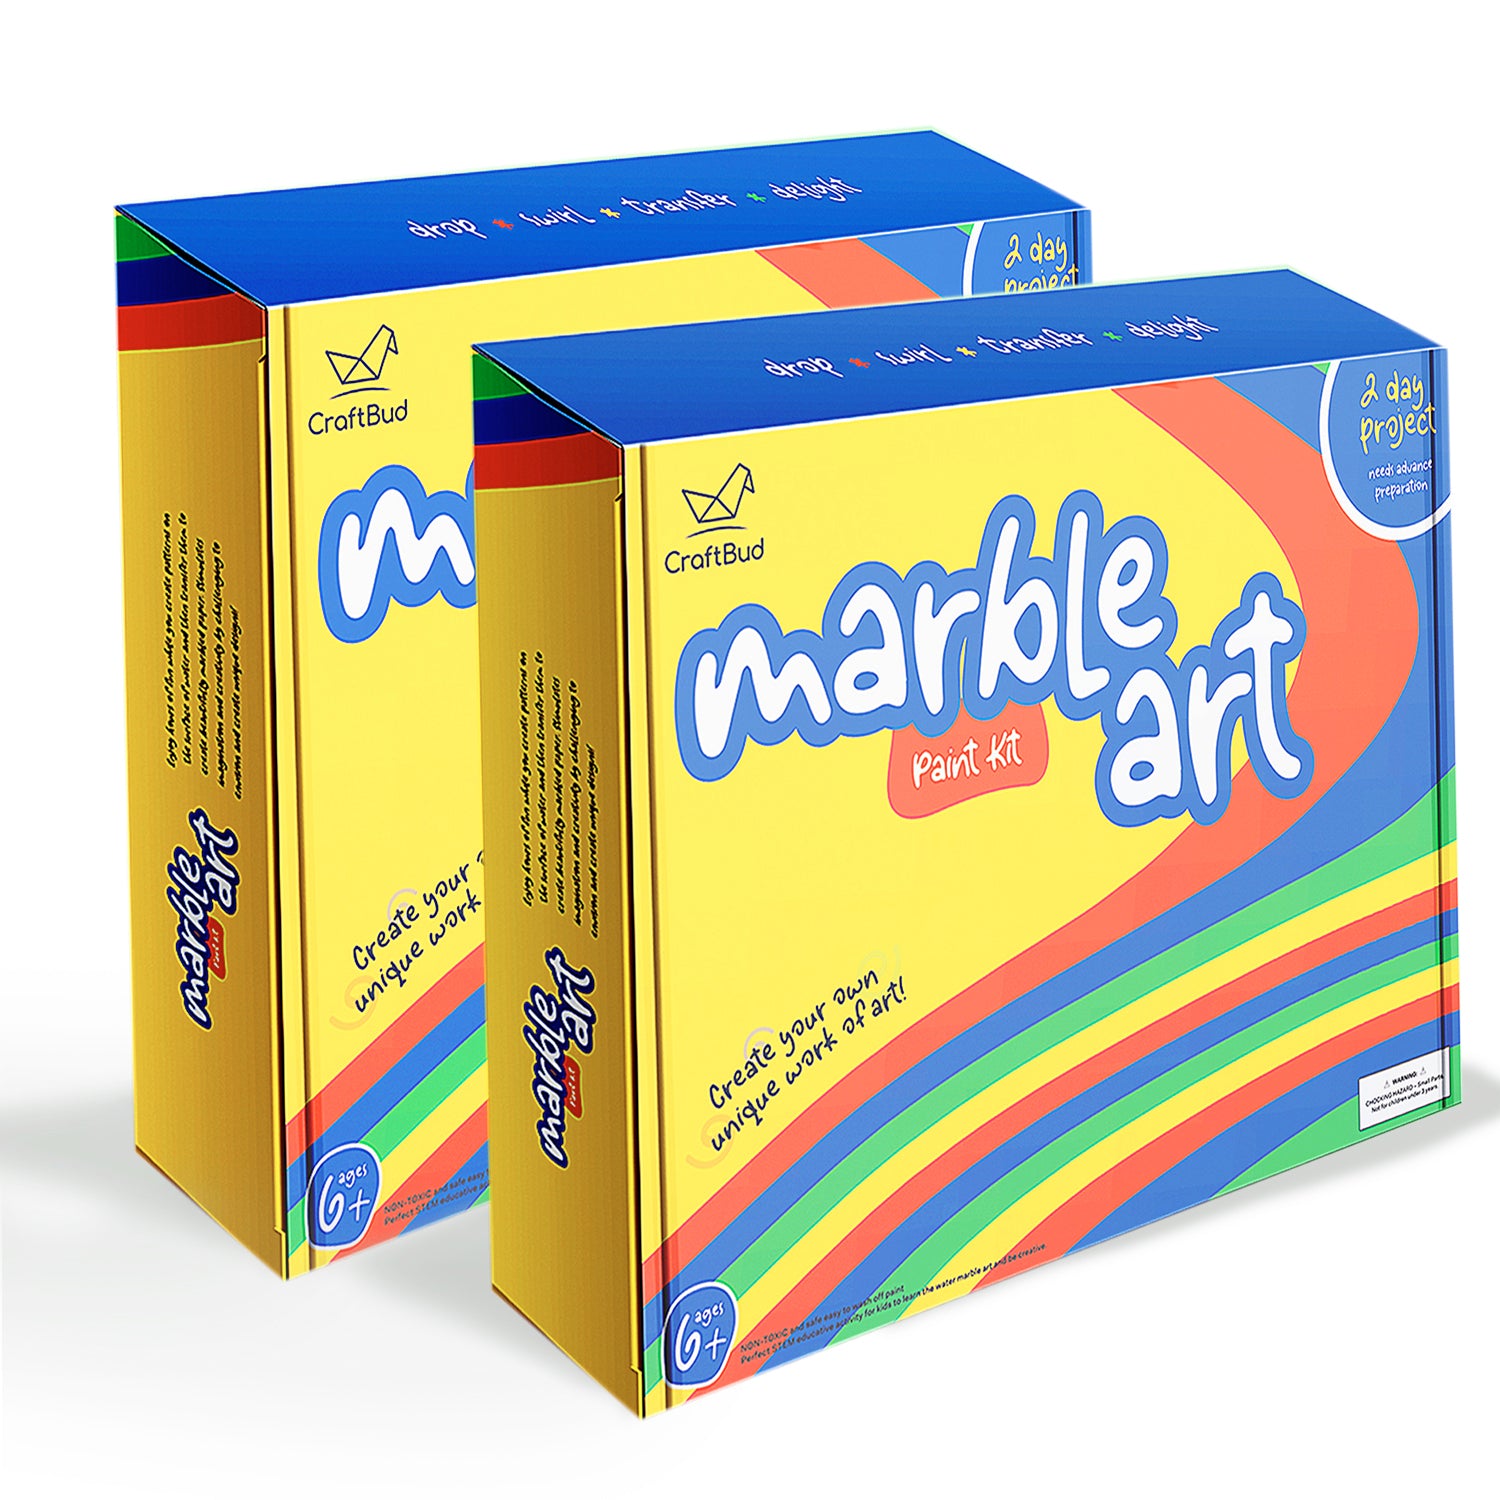 Water Marbling Paint Drawing Kit for Kids 8-12, Arts & Crafts for